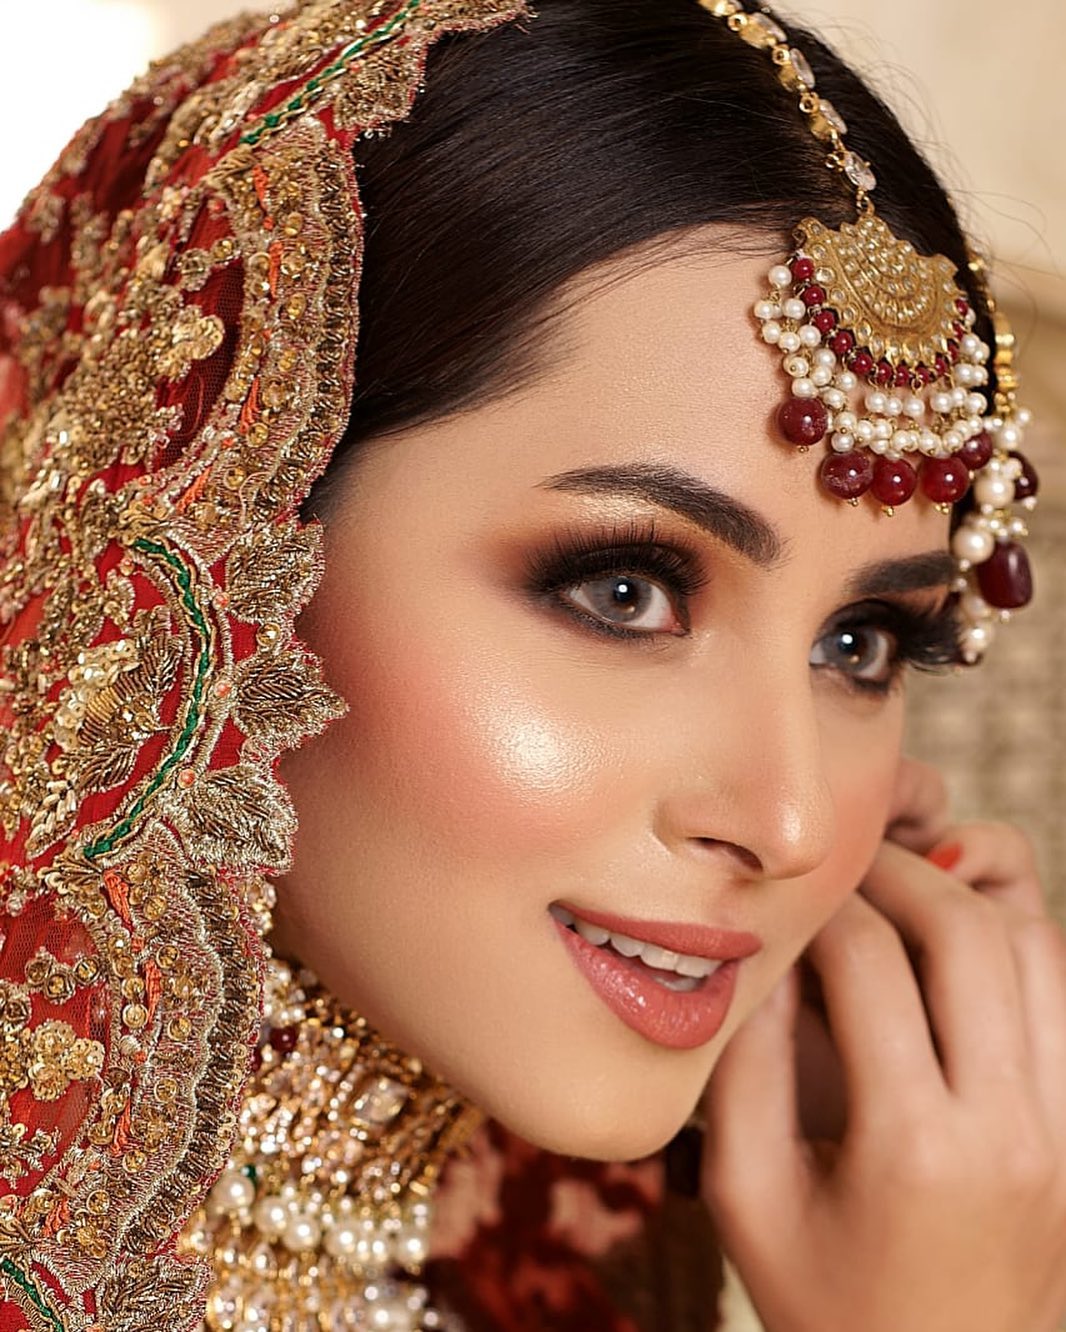 Nimra Khan Leaves Fans Flabbergasted In Her Latest Bridal Photoshoot!